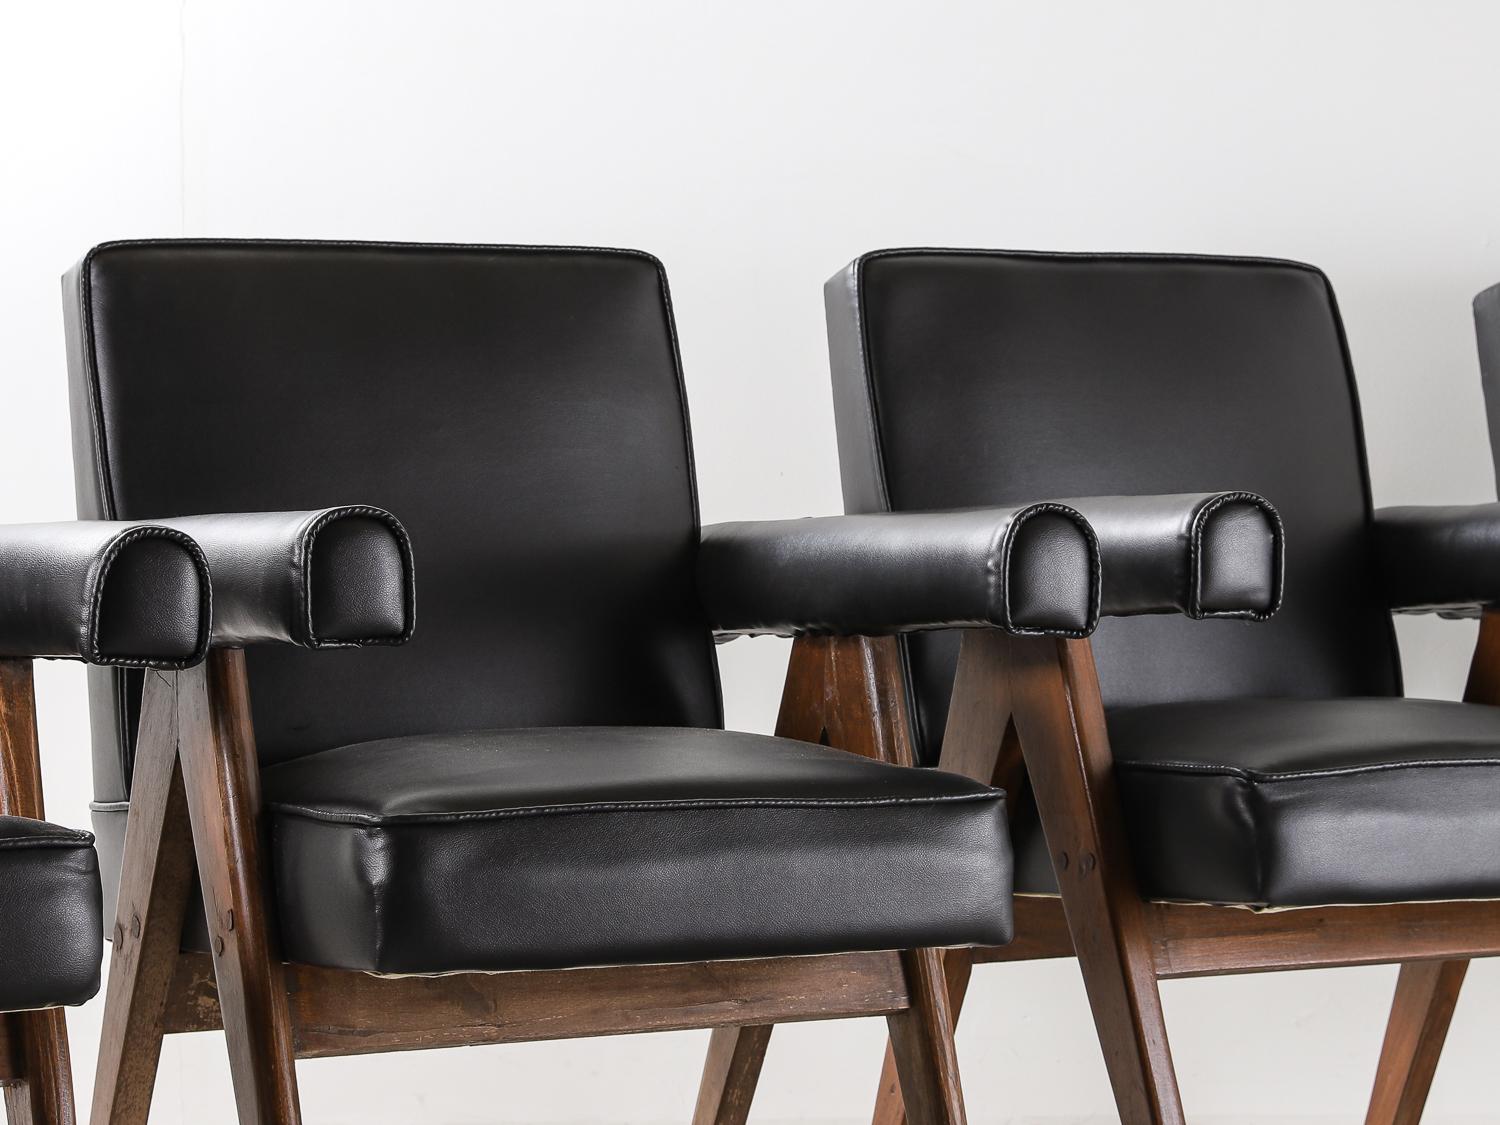 Faux Leather Set Of 4 Pierre Jeanneret ‘Committee’ Chairs, model No. PJ-SI-30-A For Sale